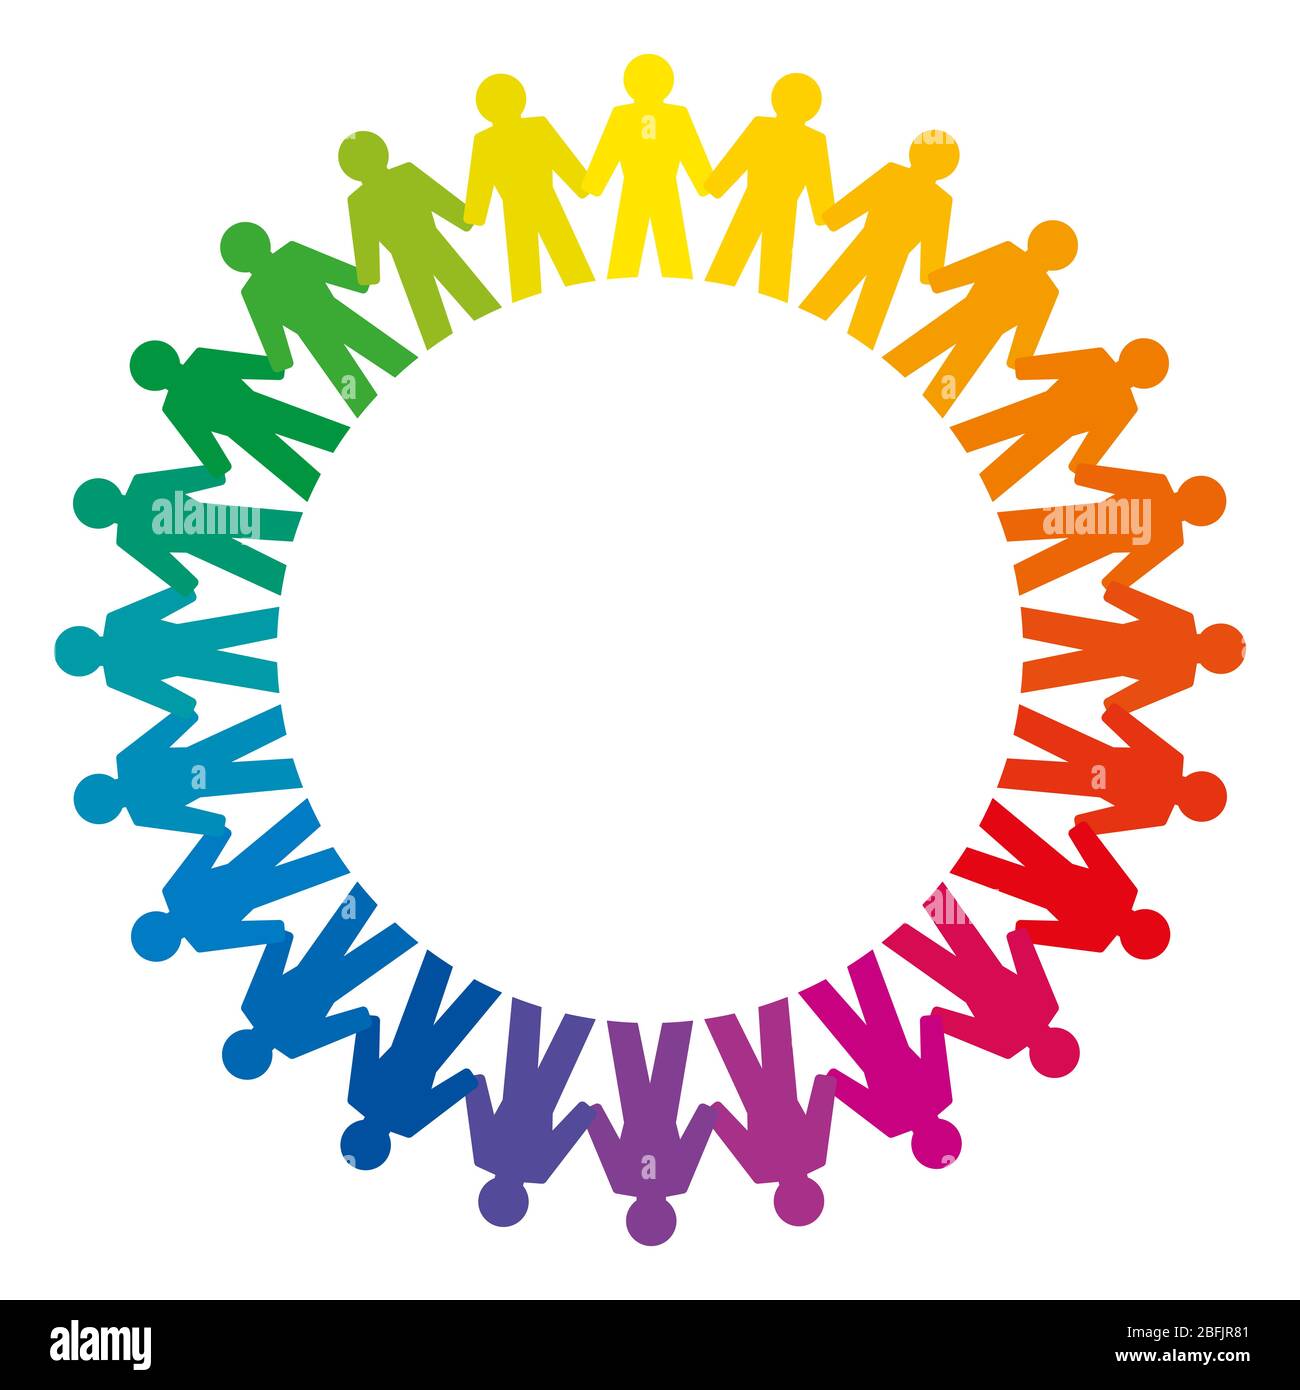 People holding hands forming a big rainbow circle. Abstract symbol of connected people standing a circle to express friendship, love and harmony. Stock Photo